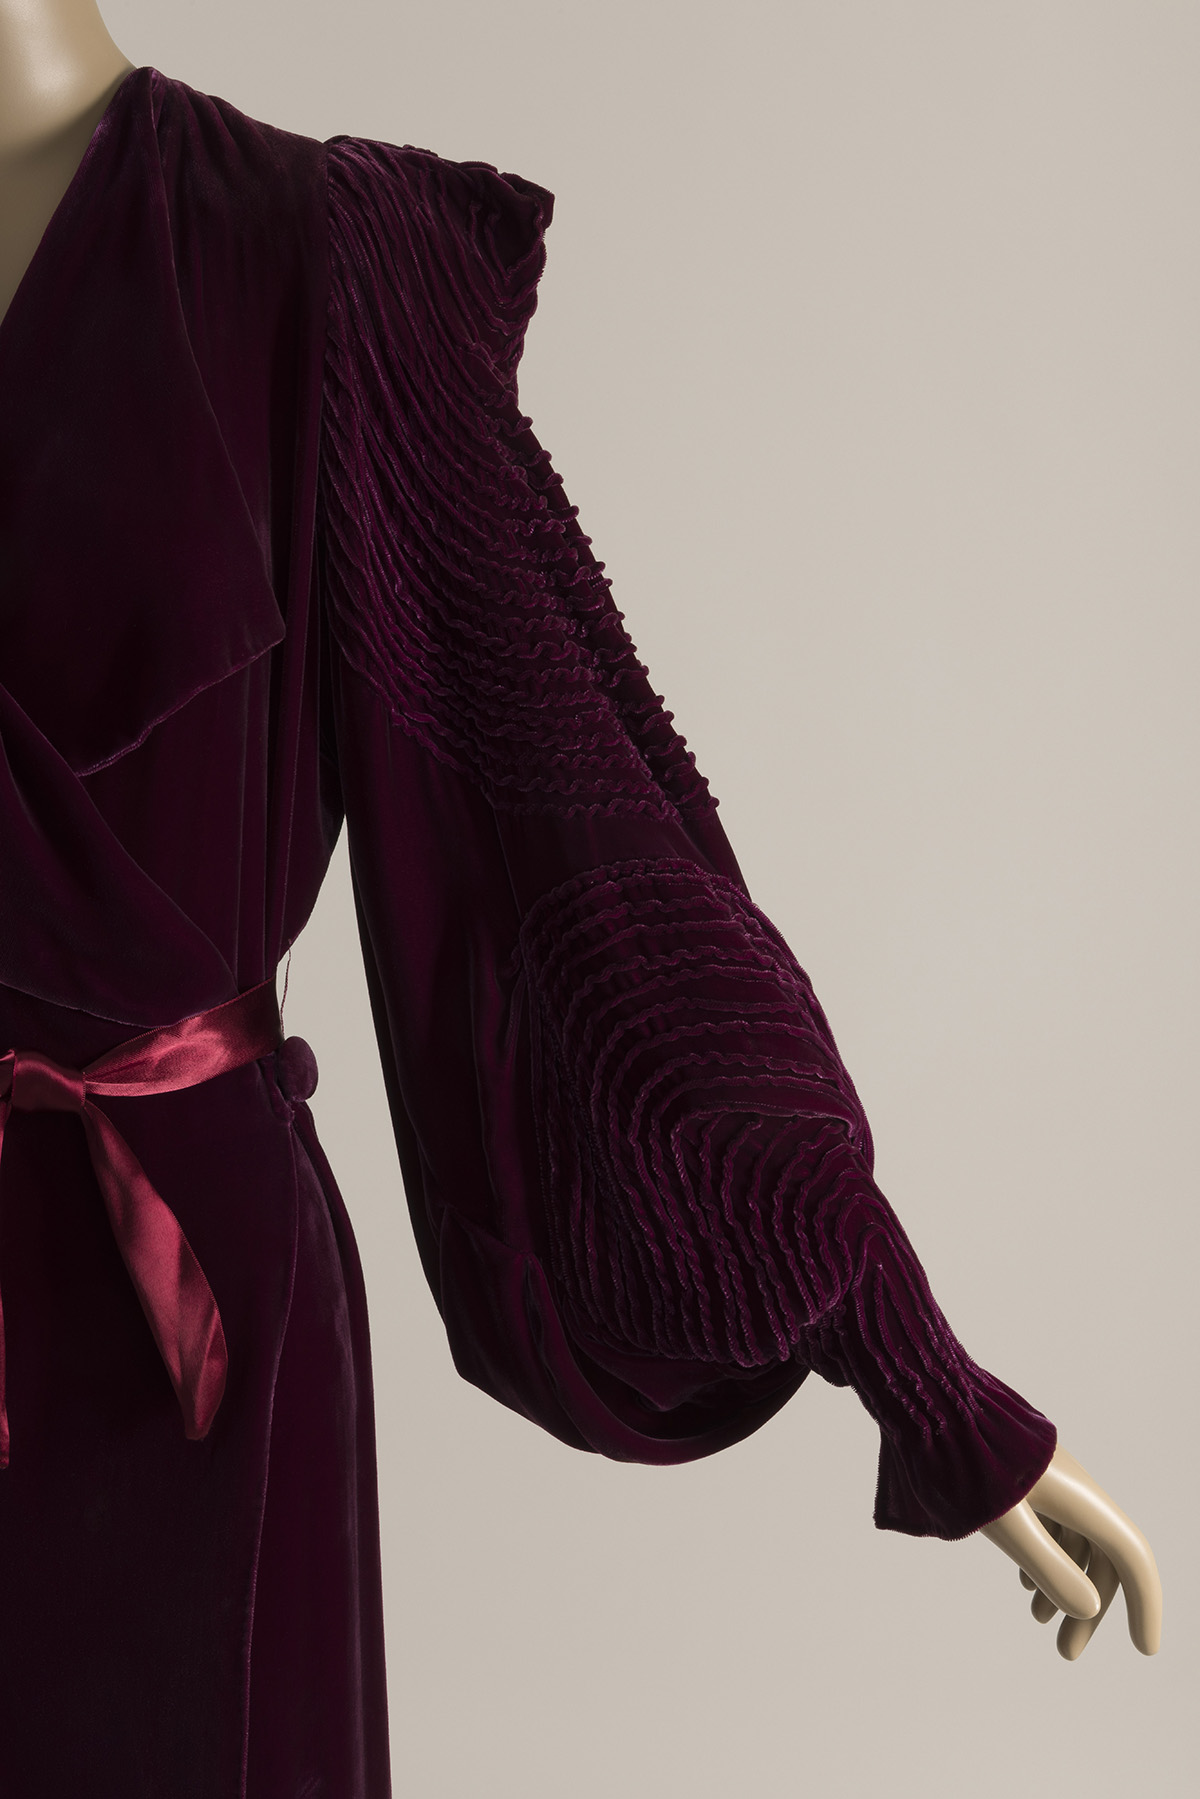 Partial side view of a woman’s dressing gown in velvet, tied at the waist with a matching silk ribbon. The full sleeve has a sharply defined shoulder, a tapered cuff, and elaborate pin-tucks in concentric circles.